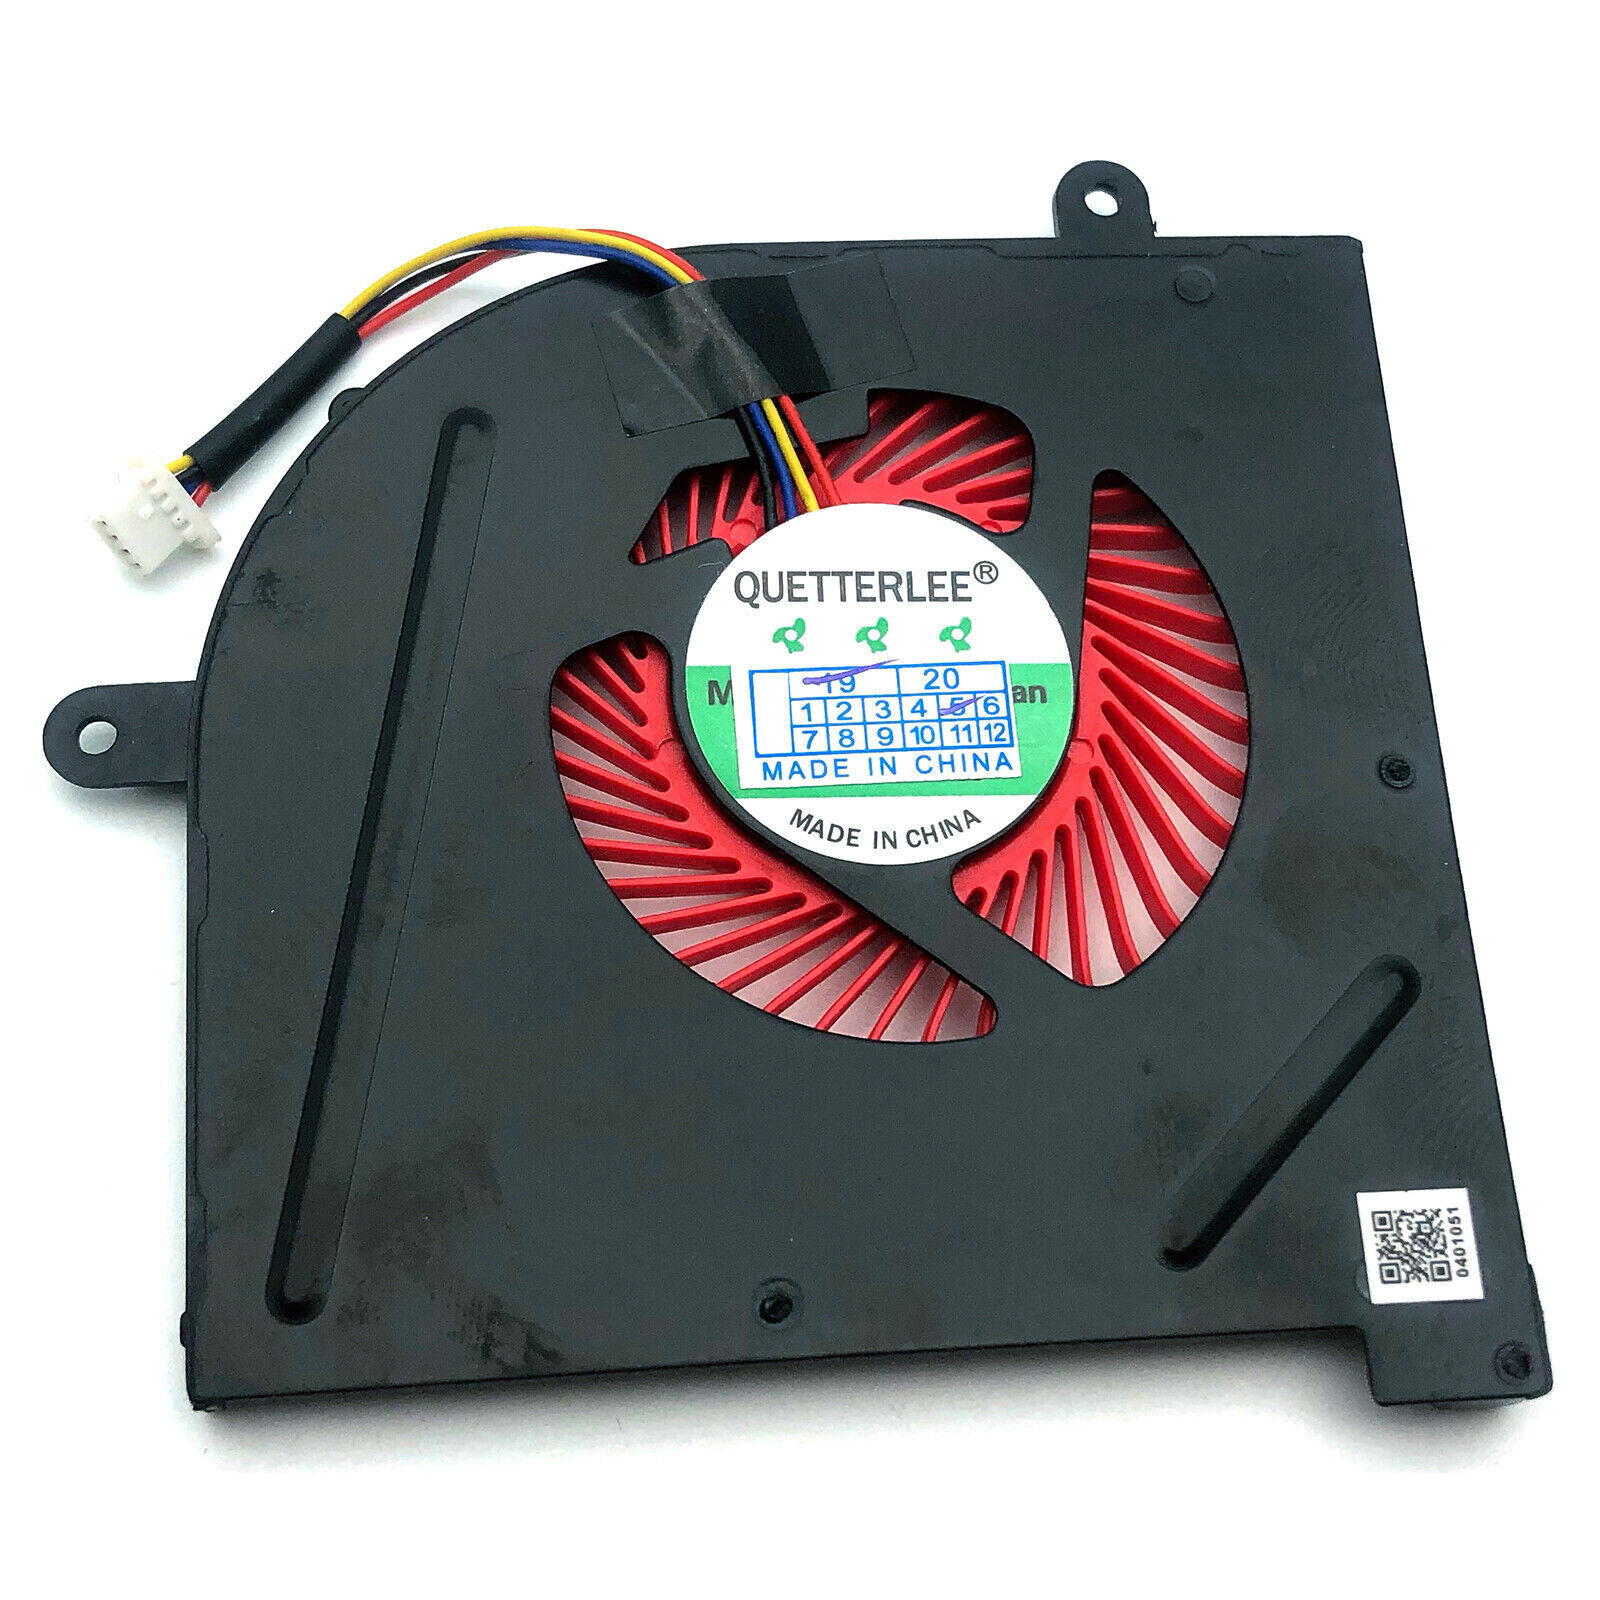 CPU + GPU Cooling Fan for MSI GS63VR 6RF, GS63VR 7RF, GS63VR Stealth Pro MS-16K2